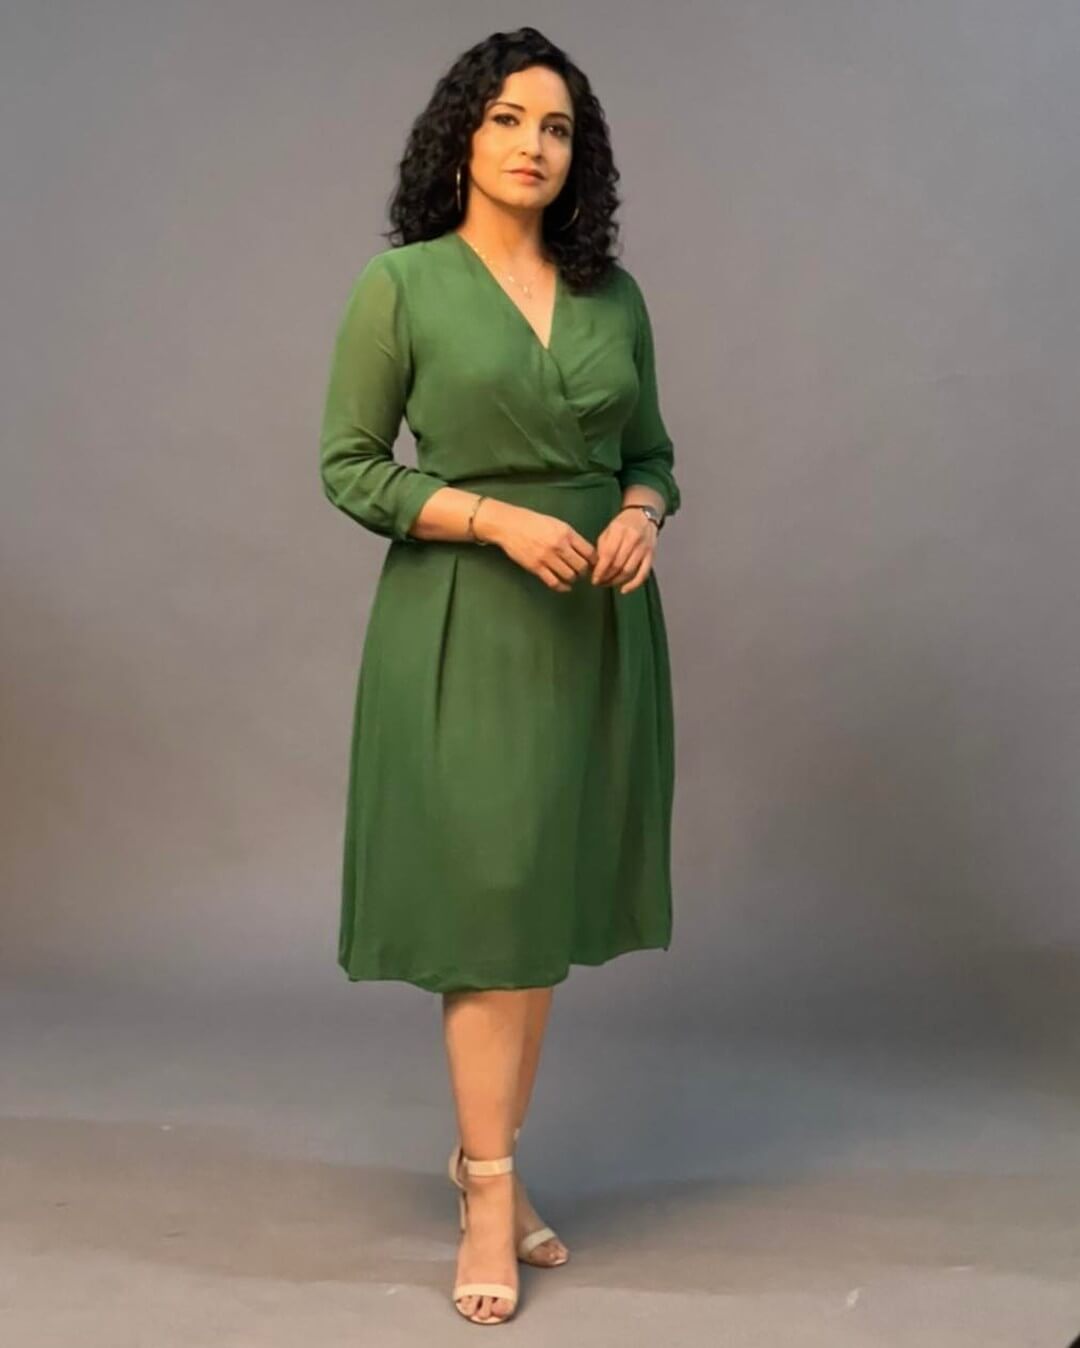 Lenaa Kumar In Olive Green V-Neck Dress With Curly Hair & Long Hoops Can Be Your Easy Going Casual Look